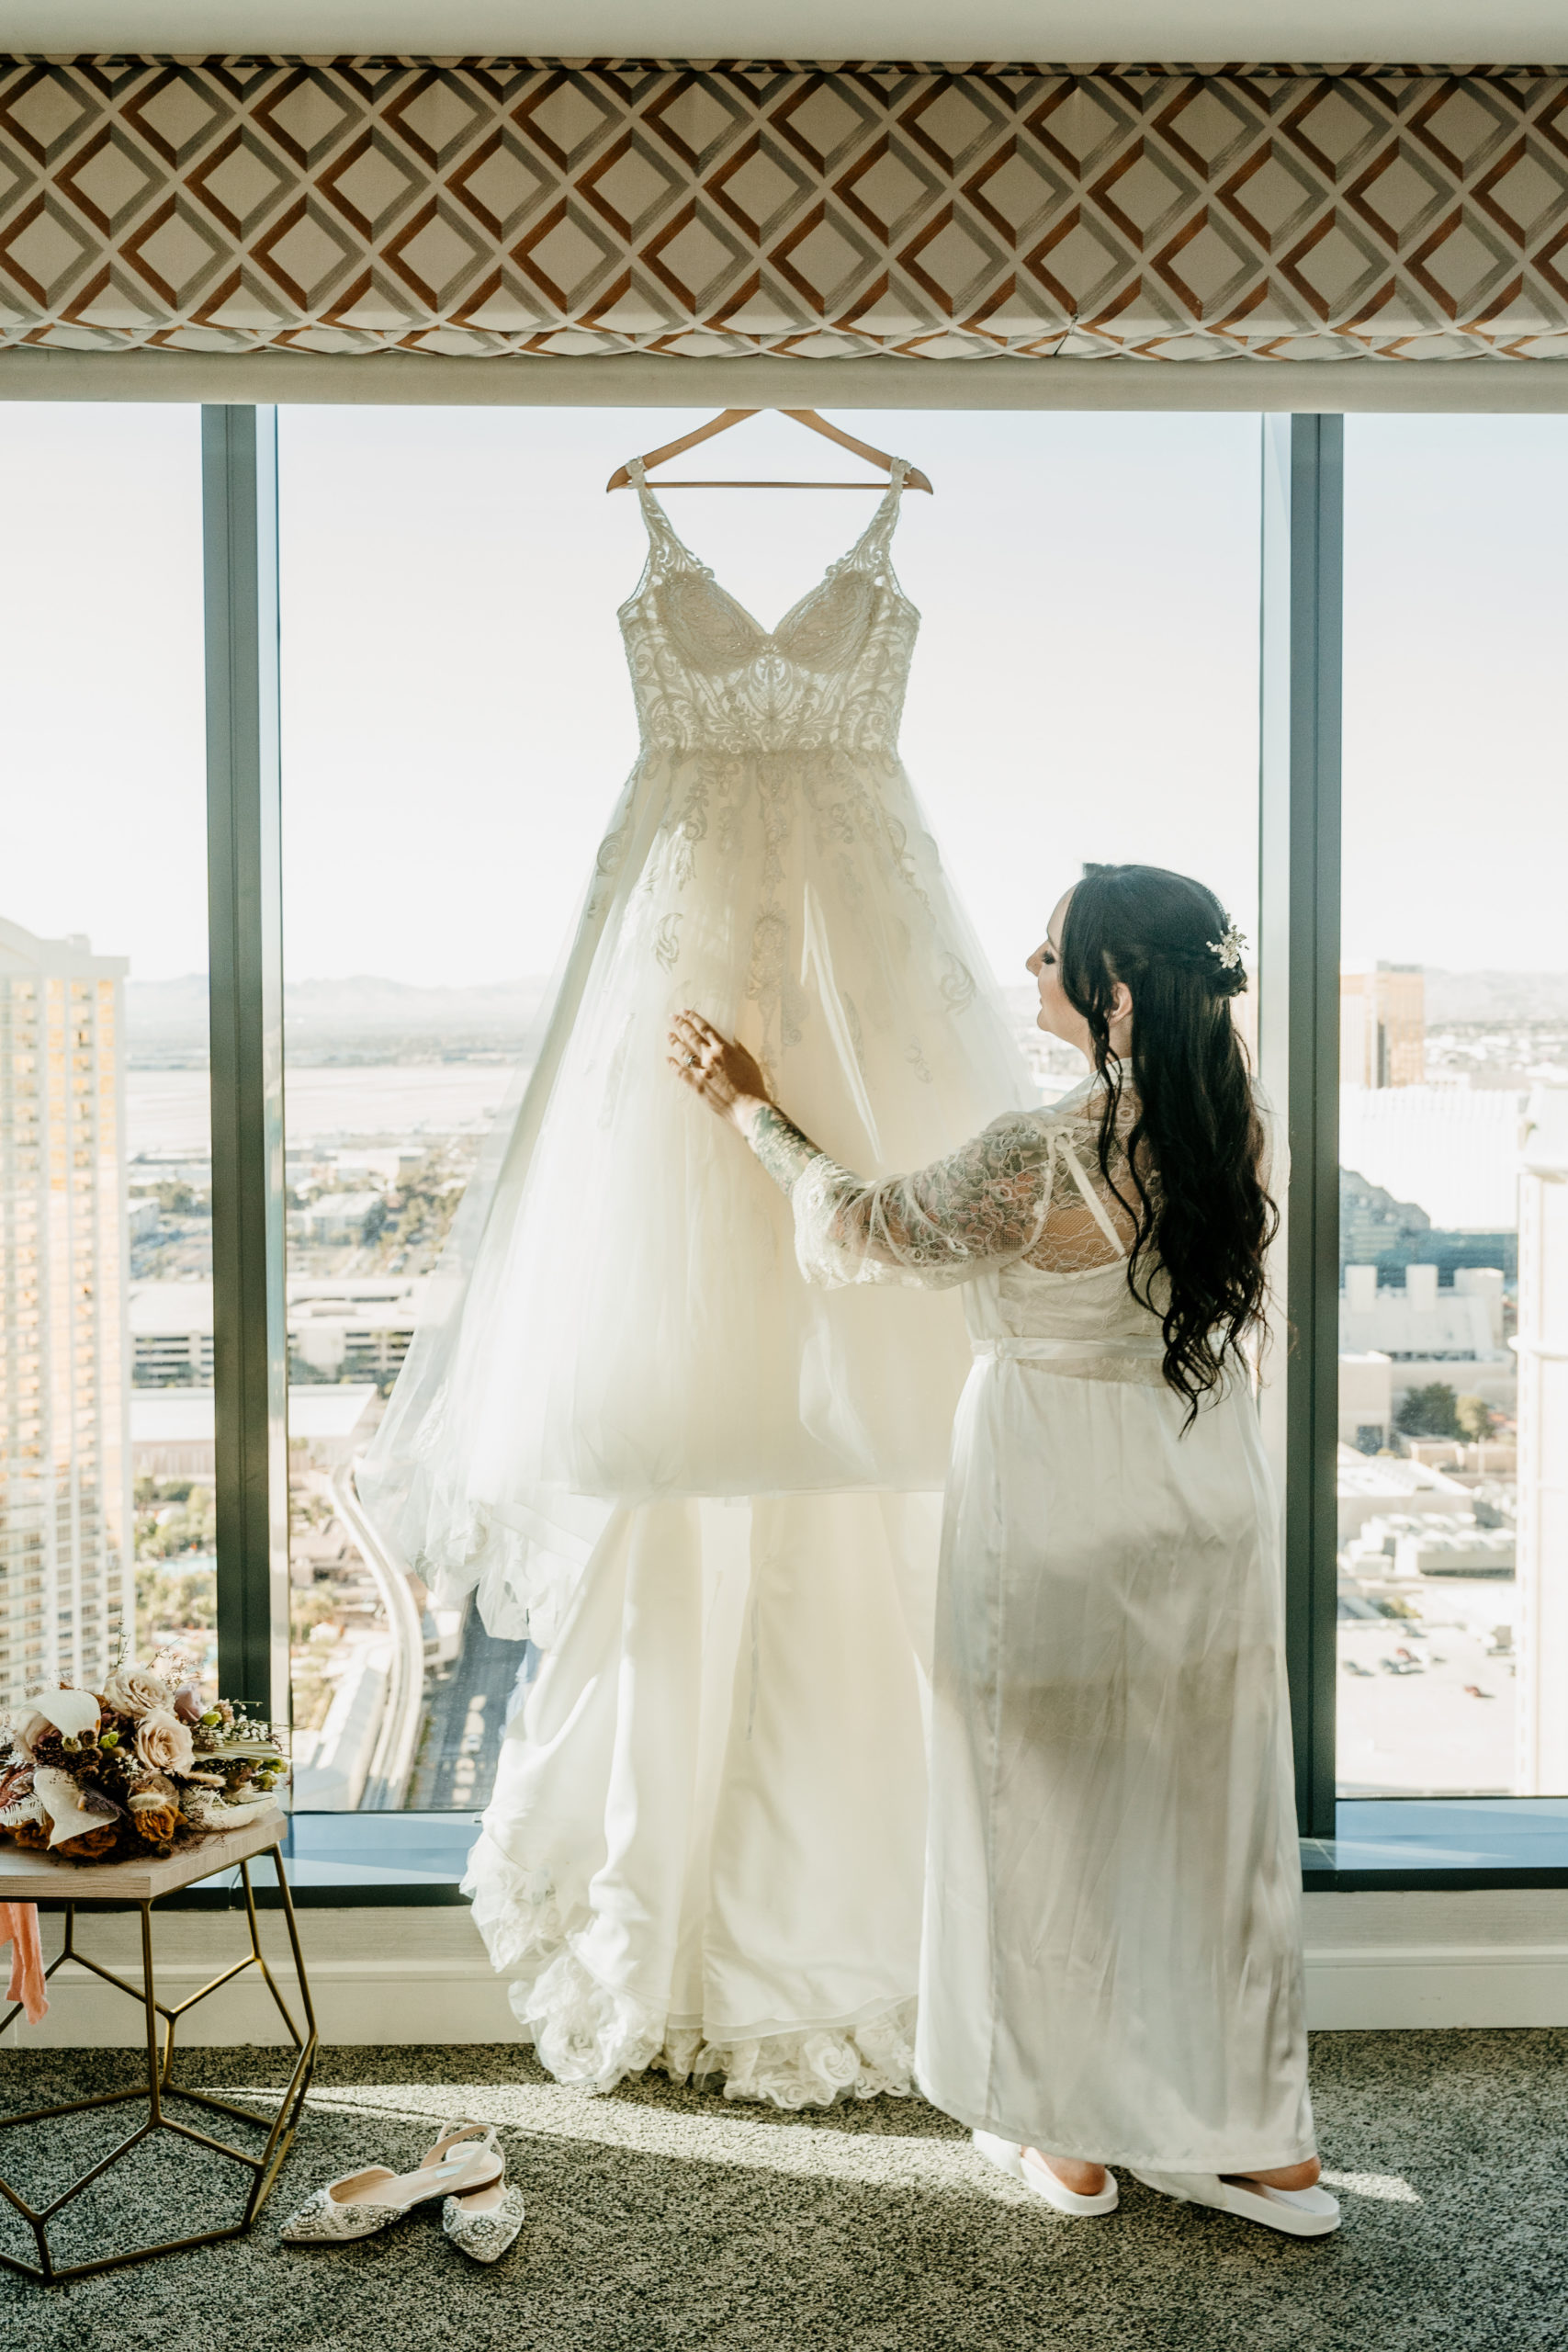 Bride admiring and looking at wedding dress before getting in it 